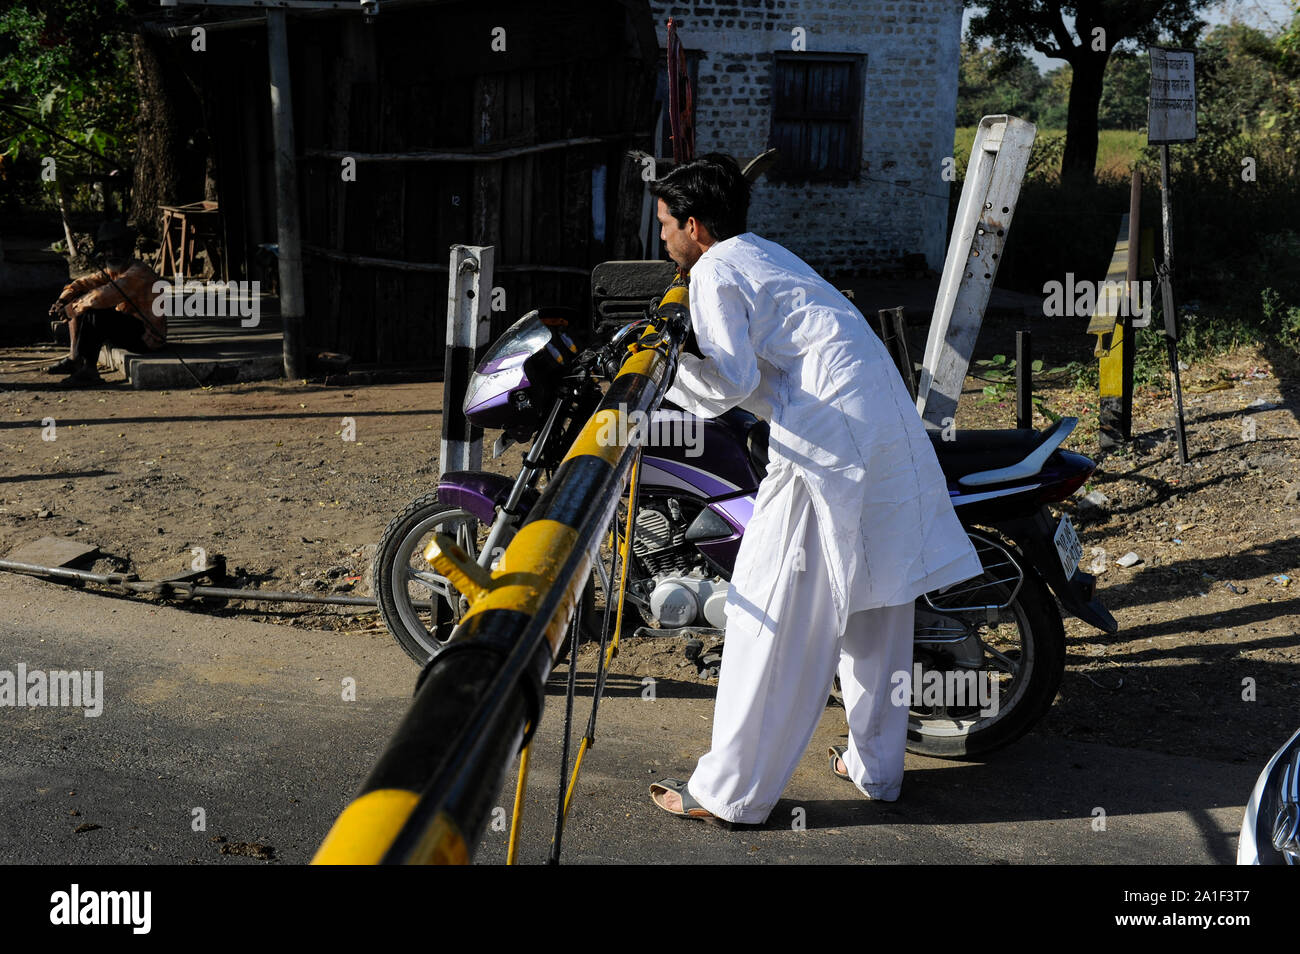 INDIA, Madhya Pradesh, Nimad region, Khargone, motorbike driver violate traffic rules while crossing a Railroad Crossing with closed barriers Stock Photo